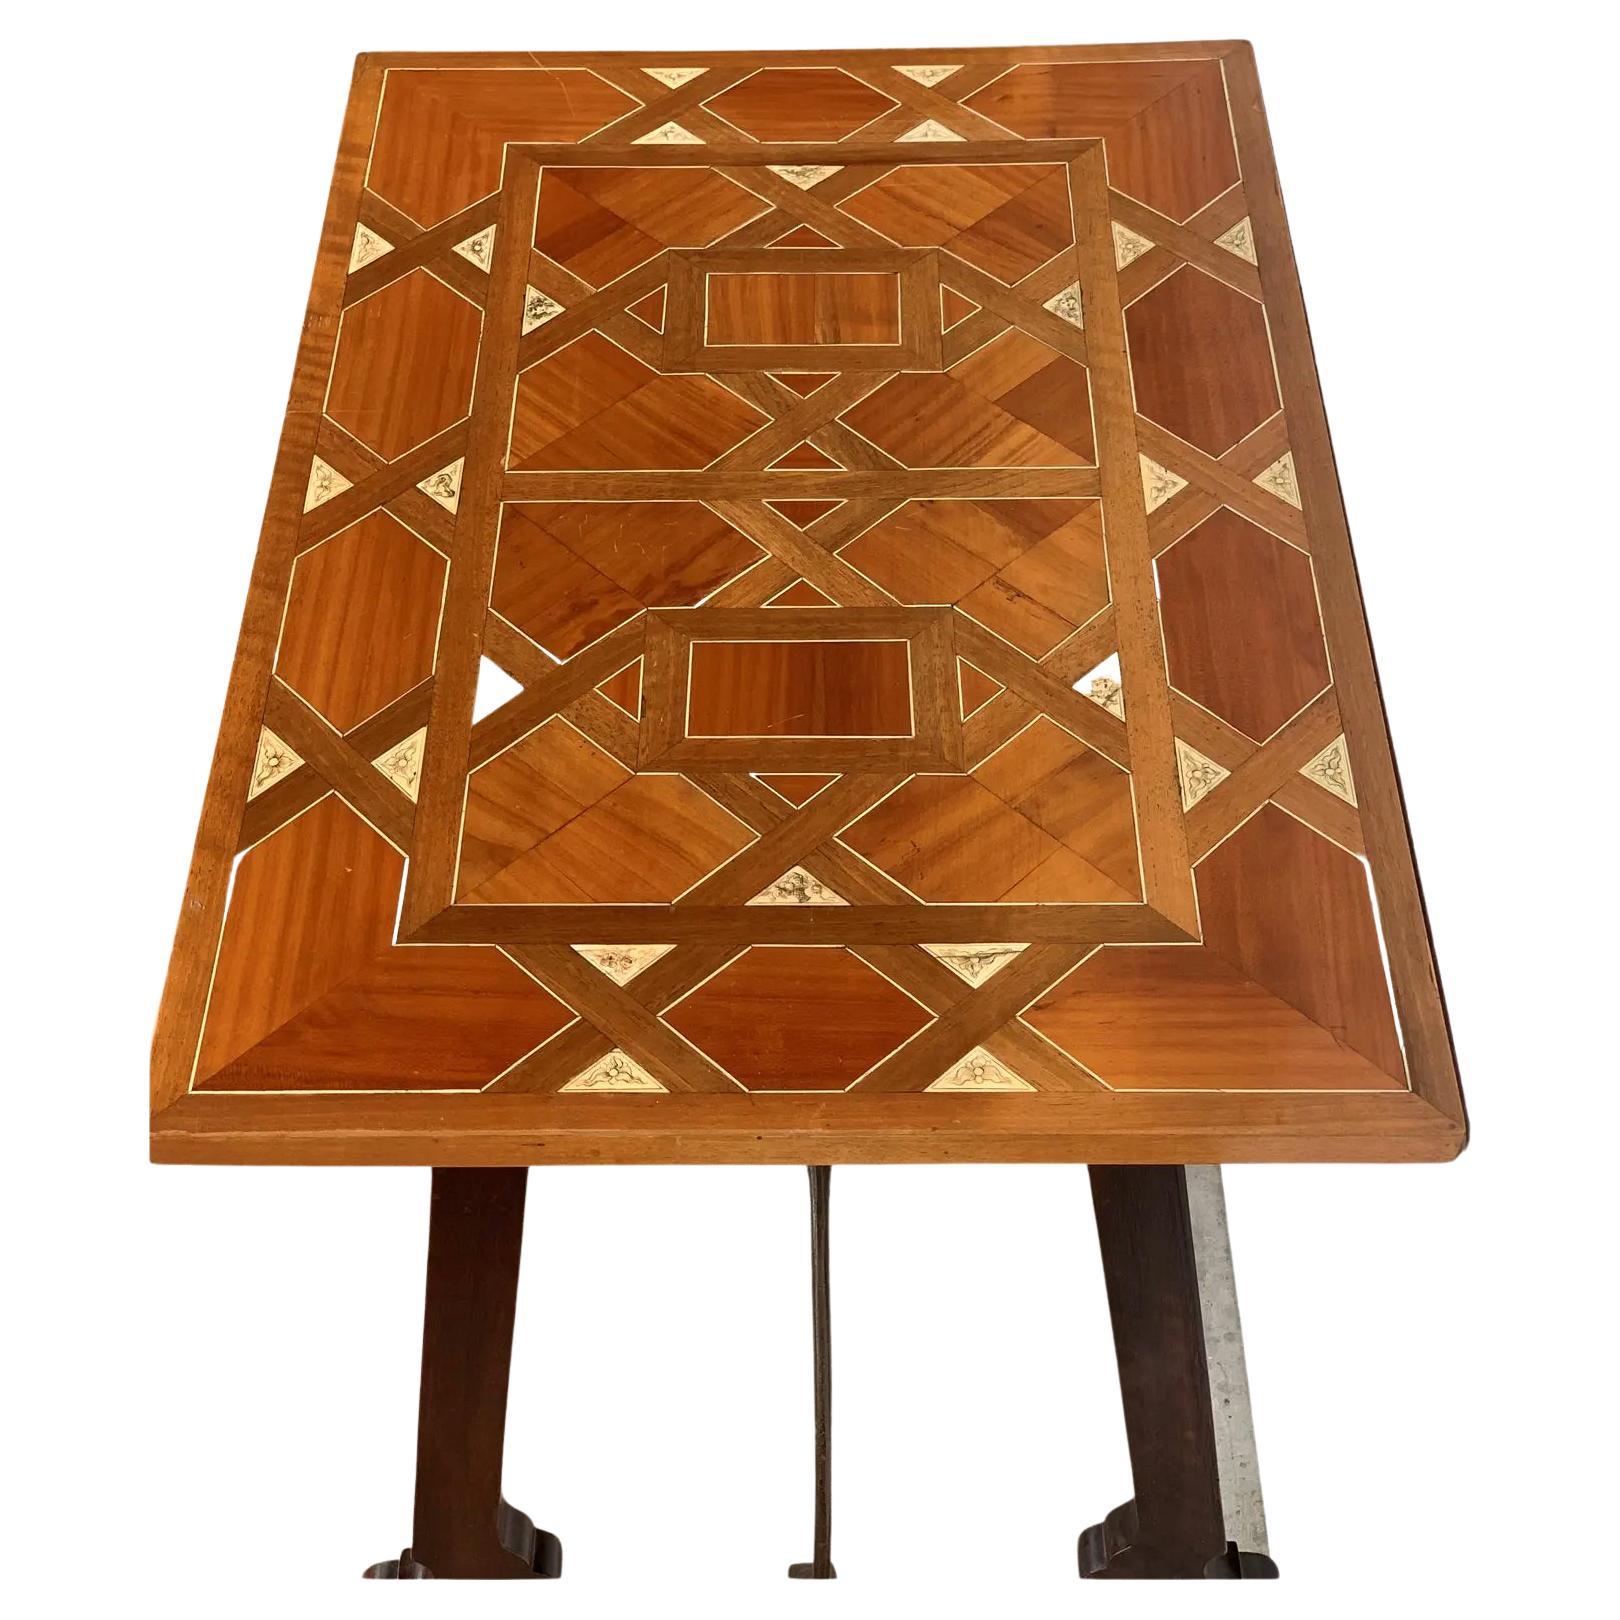 About
19th century Baroque Spanish side table with marquetry top

19th century Spanish trestle table in walnut. This piece has a great scale, lovely lyre legs and beautiful marquetry top. . This table could be used as an end table, nightstand,